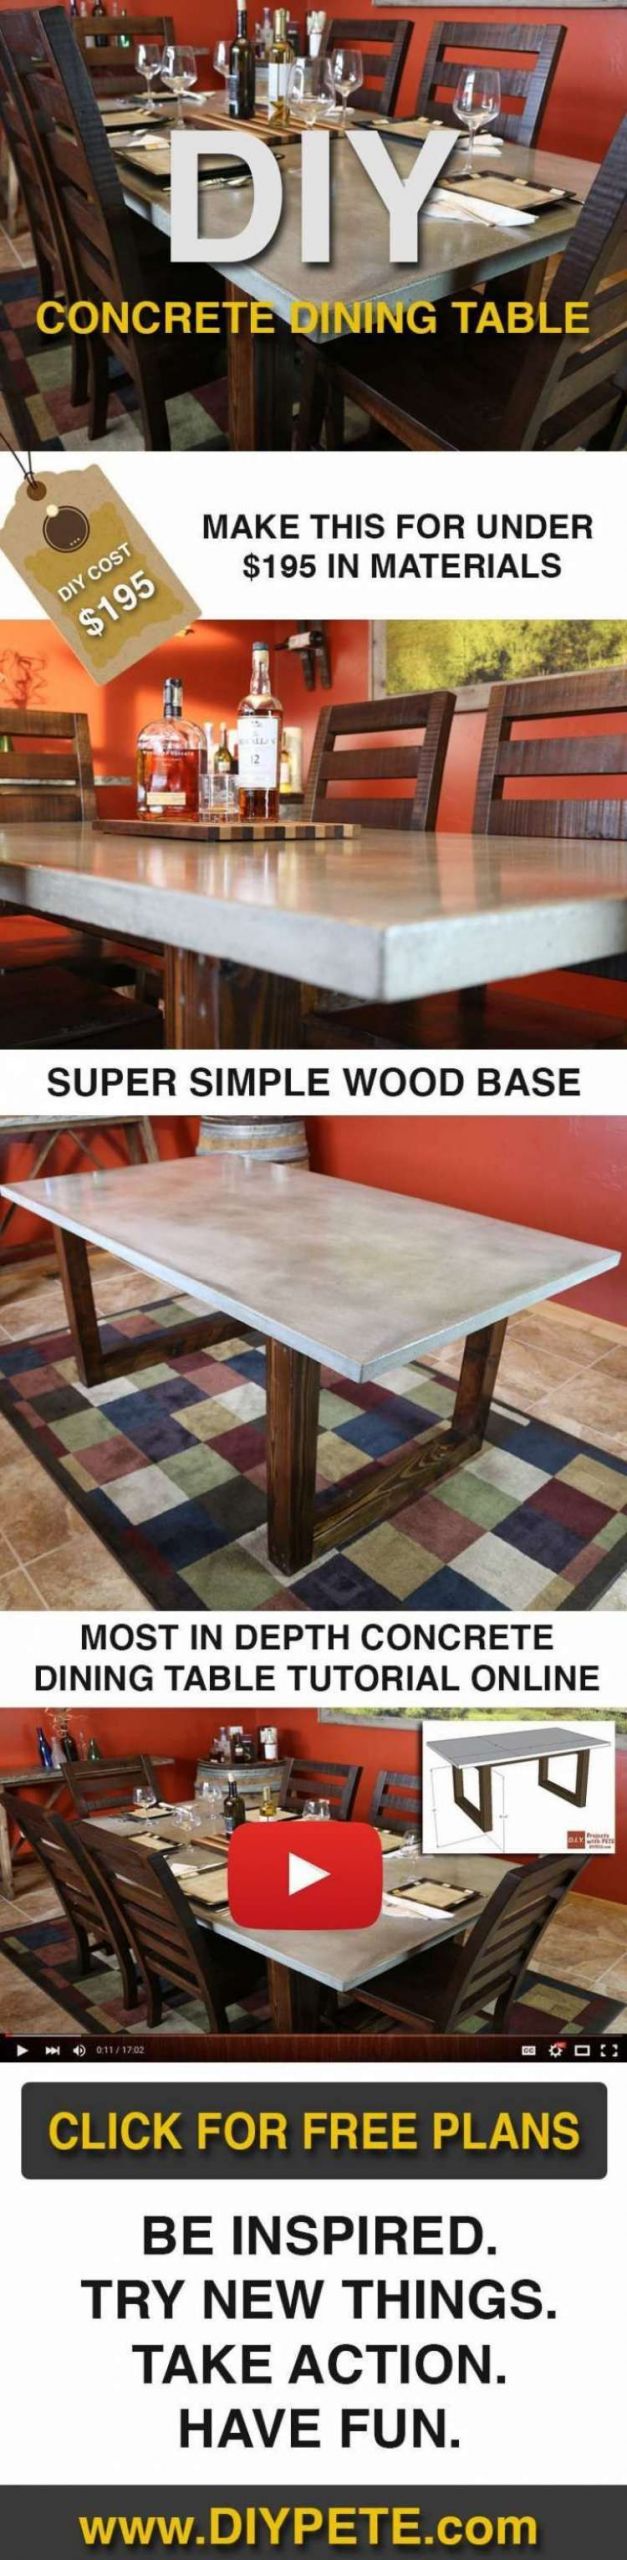 wooden table plans inspirational 14 awesome diy hardwood floor table of wooden table plans